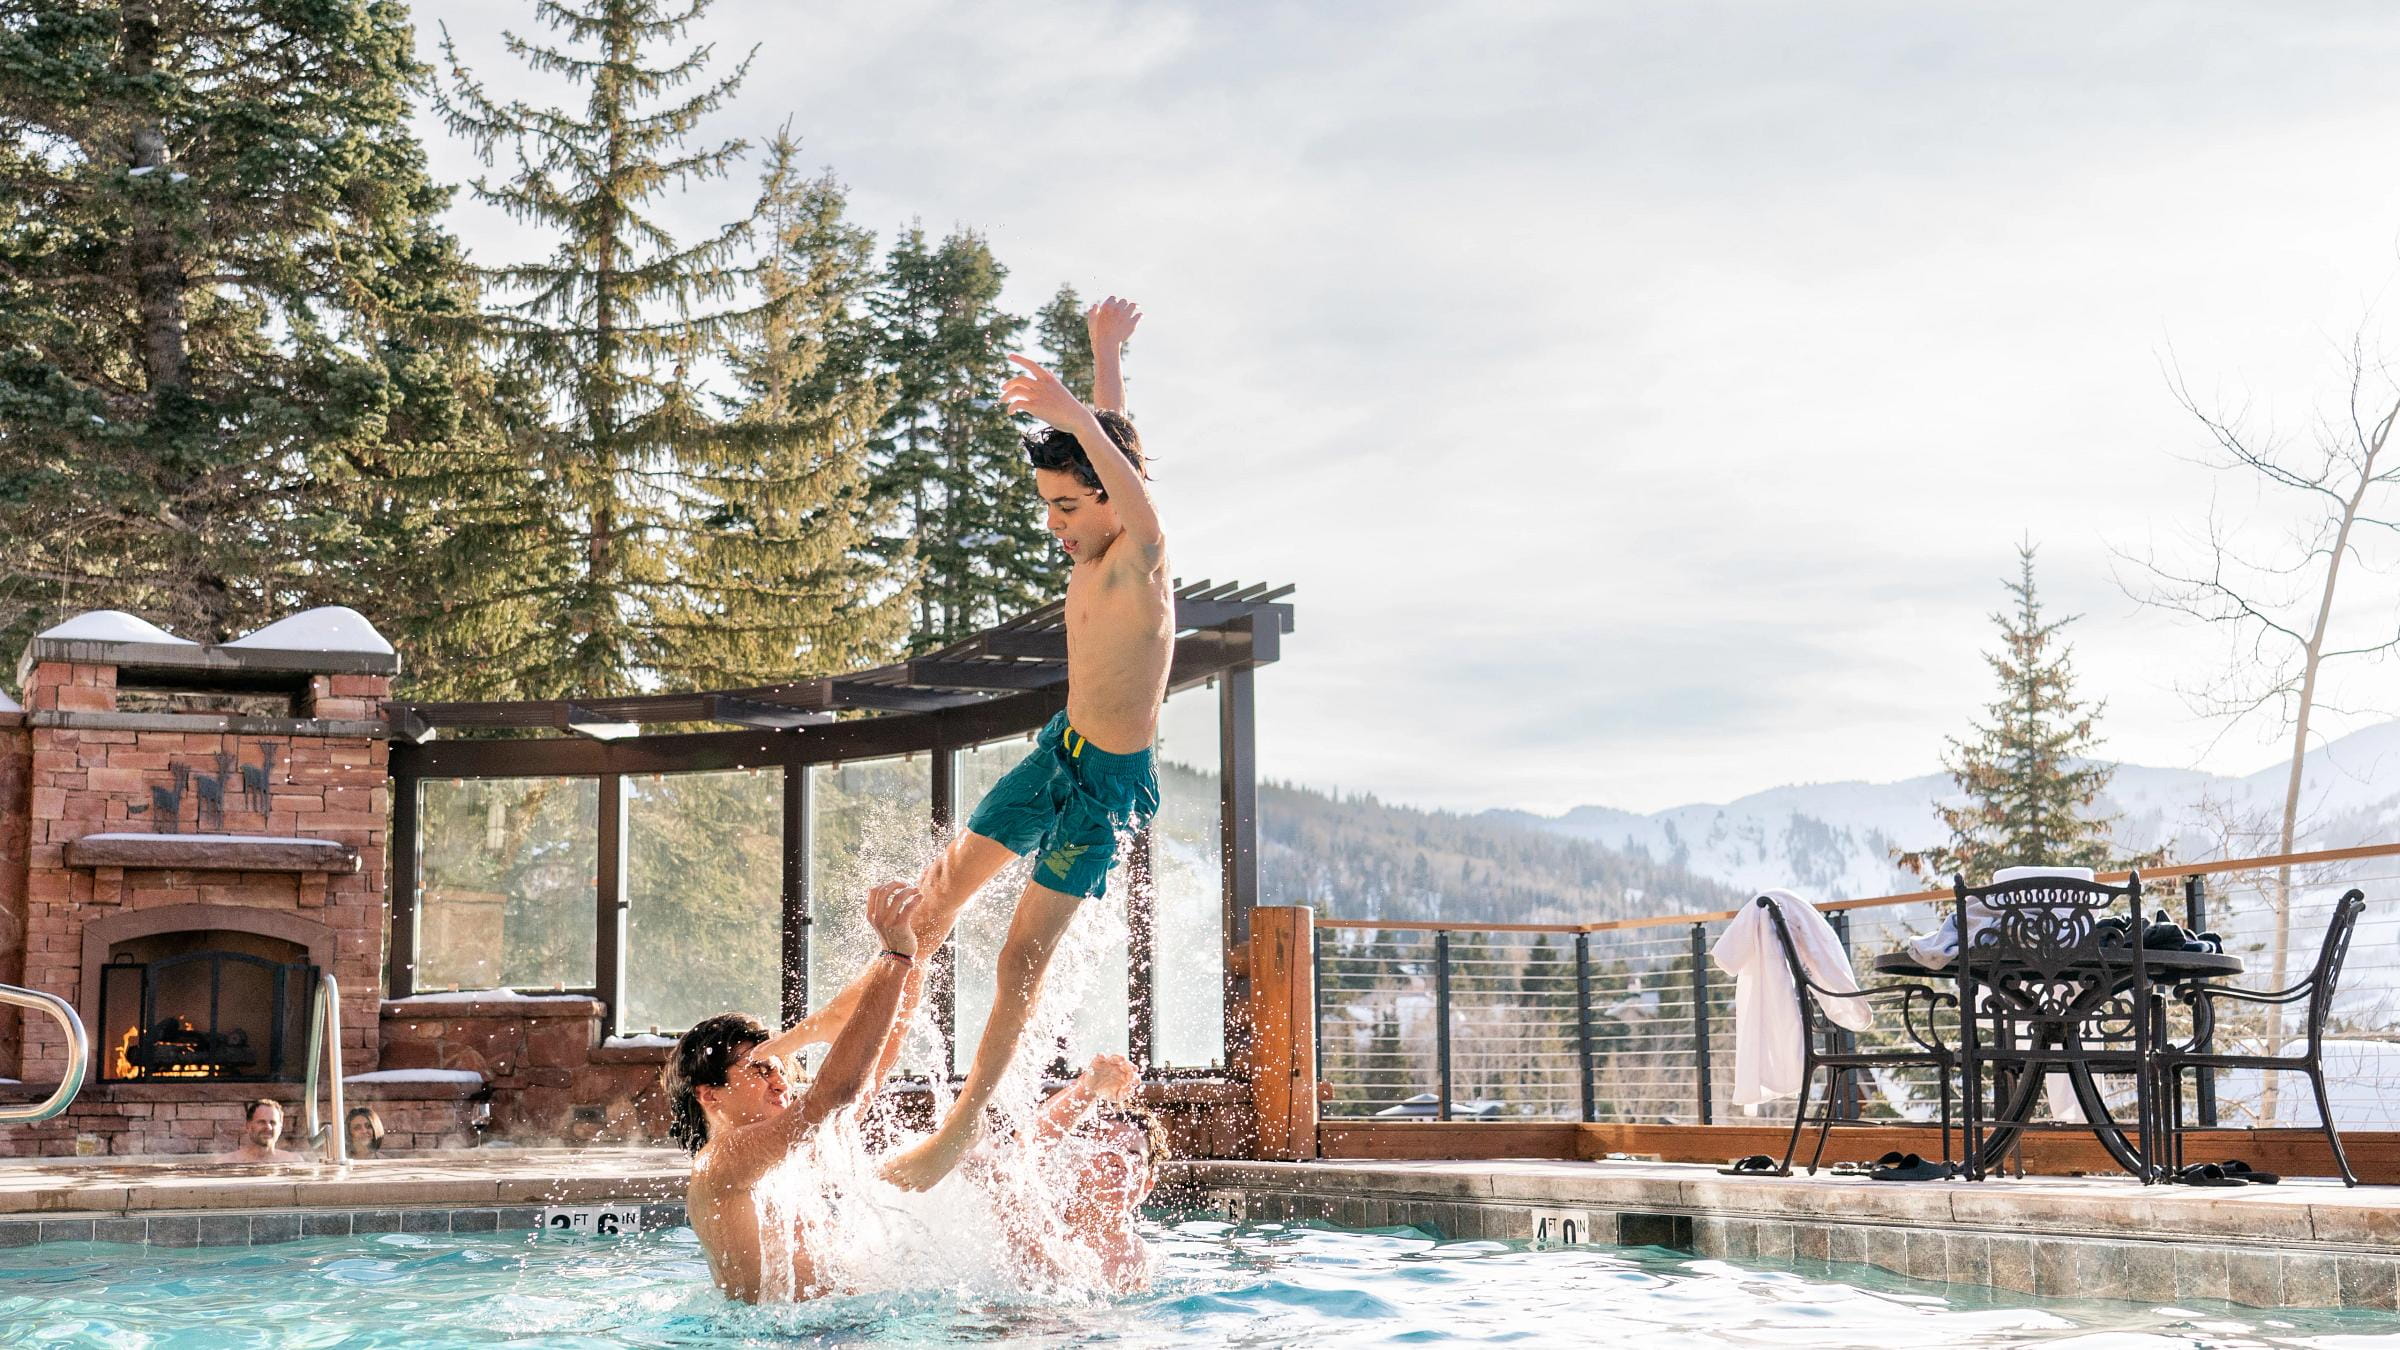 Kids jump in the pool at Deer Valley's Stag Lodge